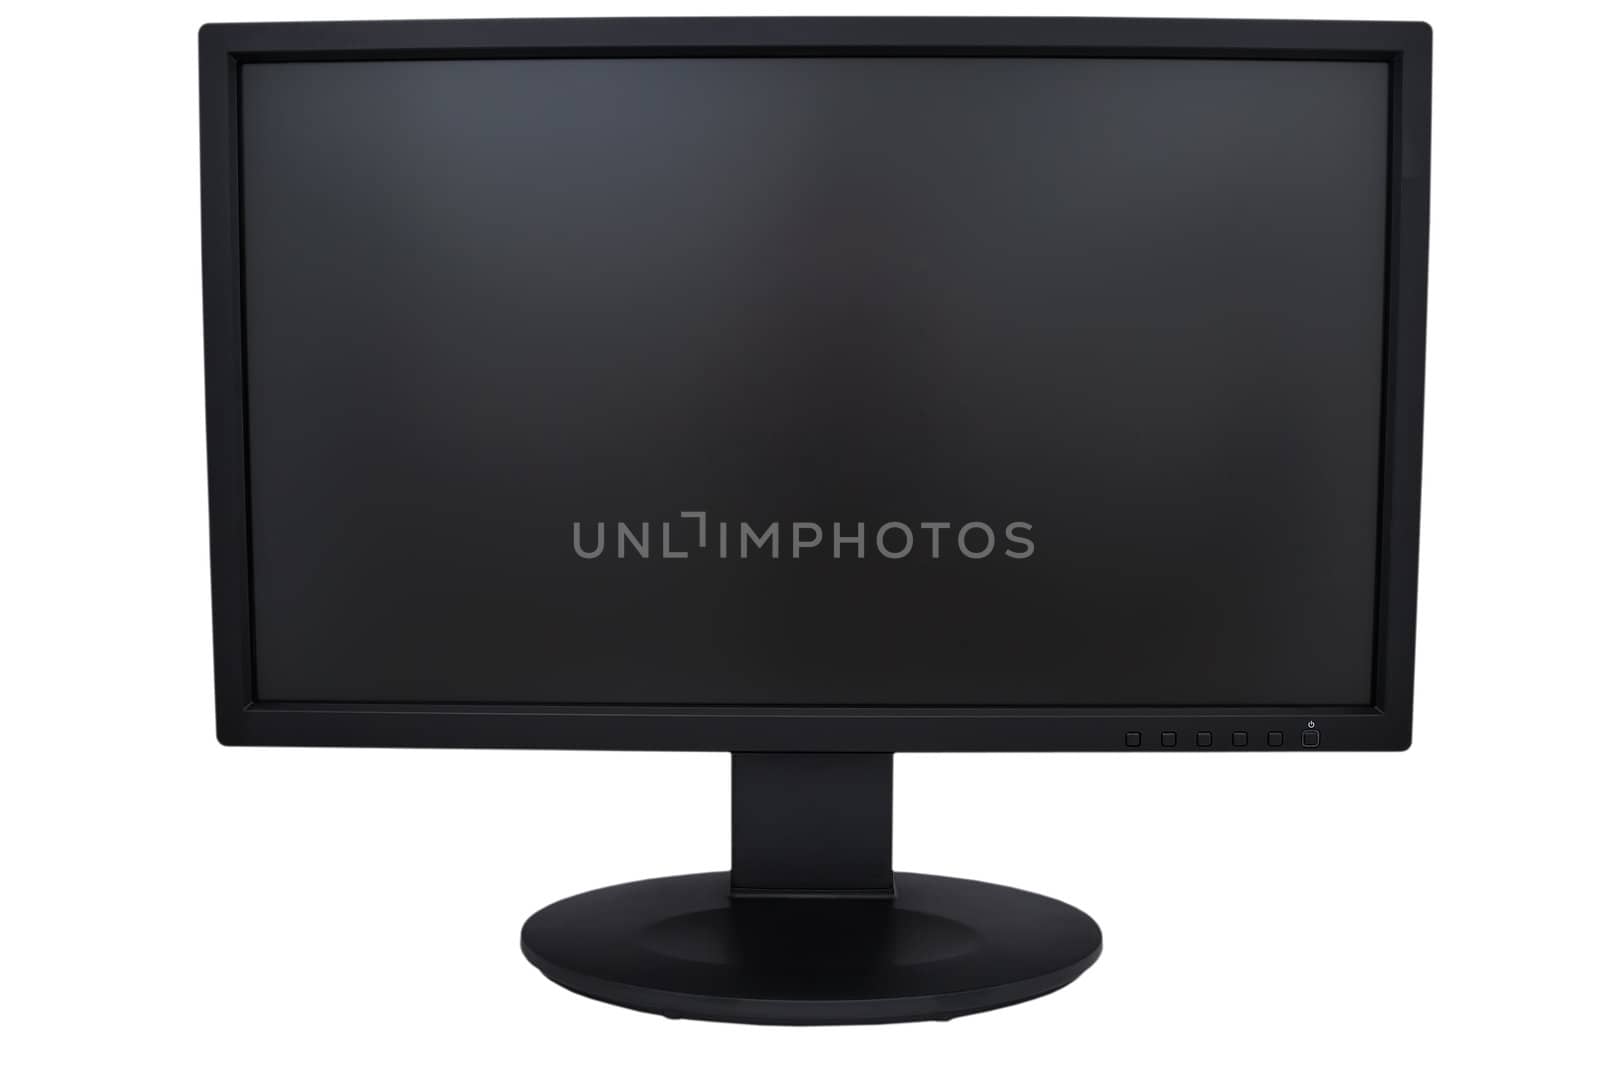 black wide computer monitor on white background